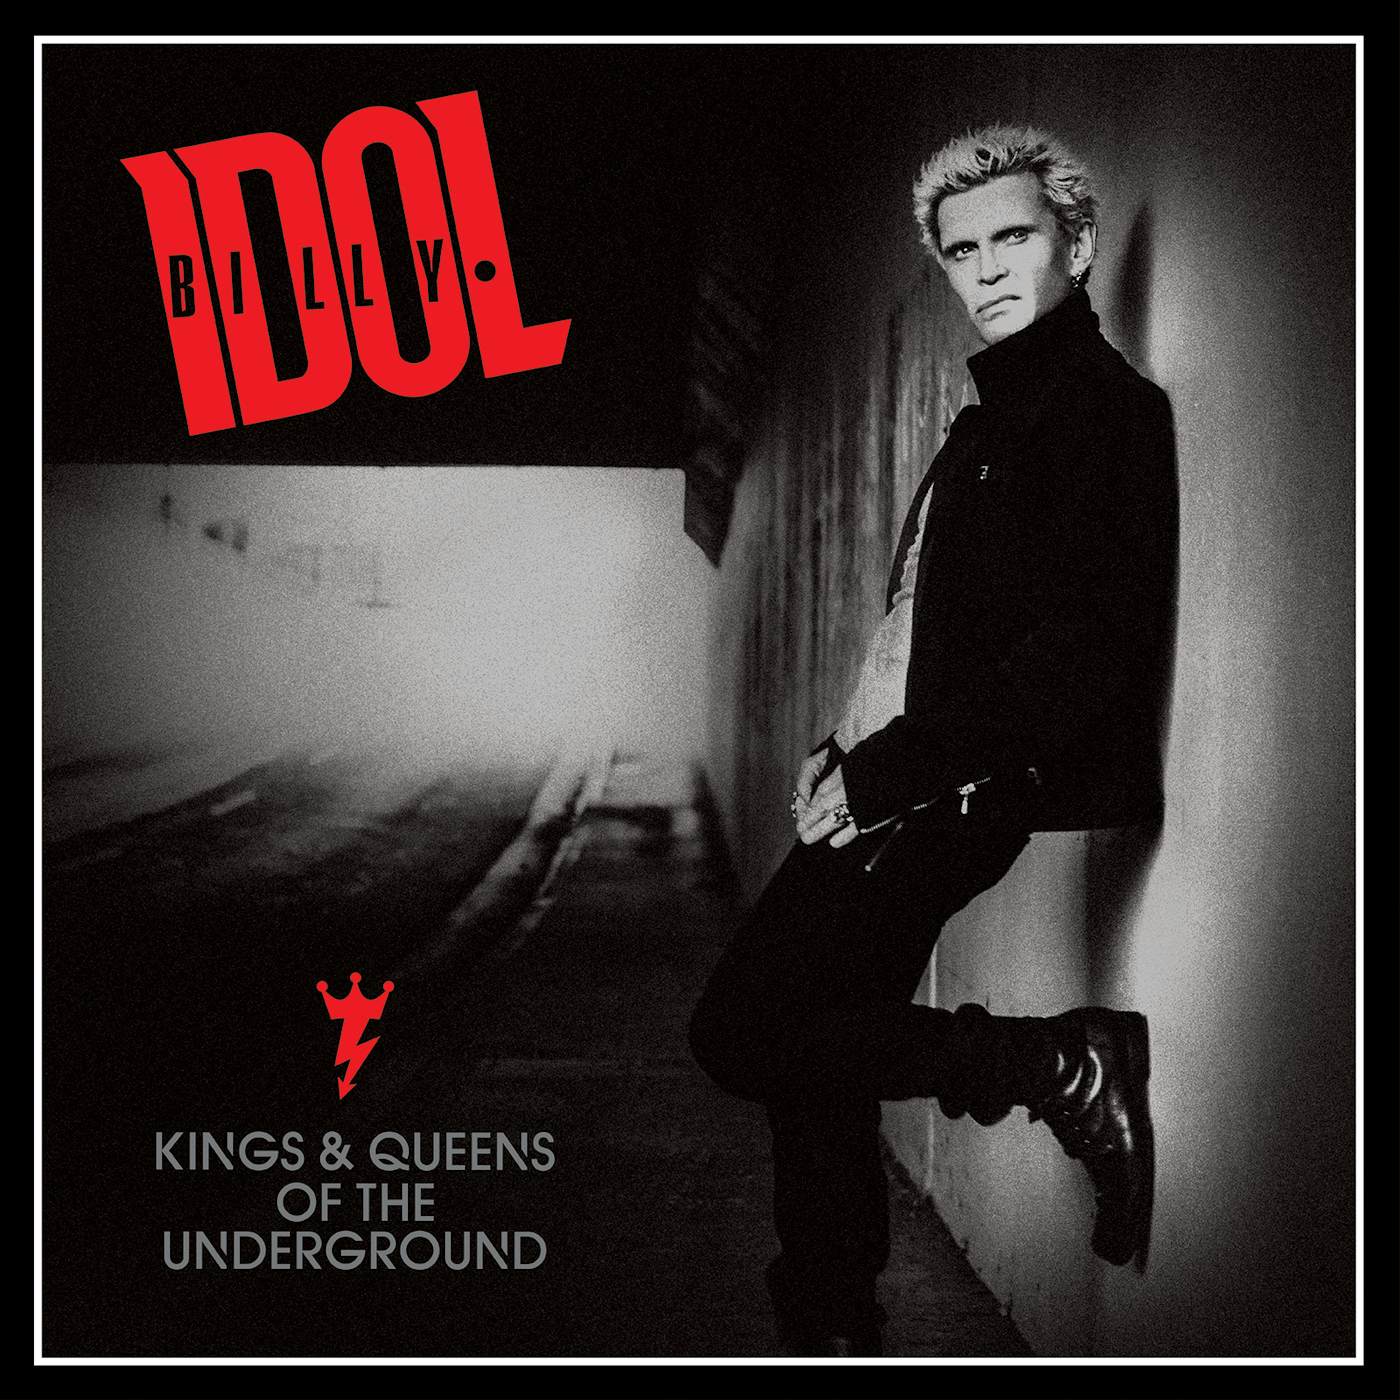 Billy Idol KINGS & QUEENS OF THE UNDERGROUND CD